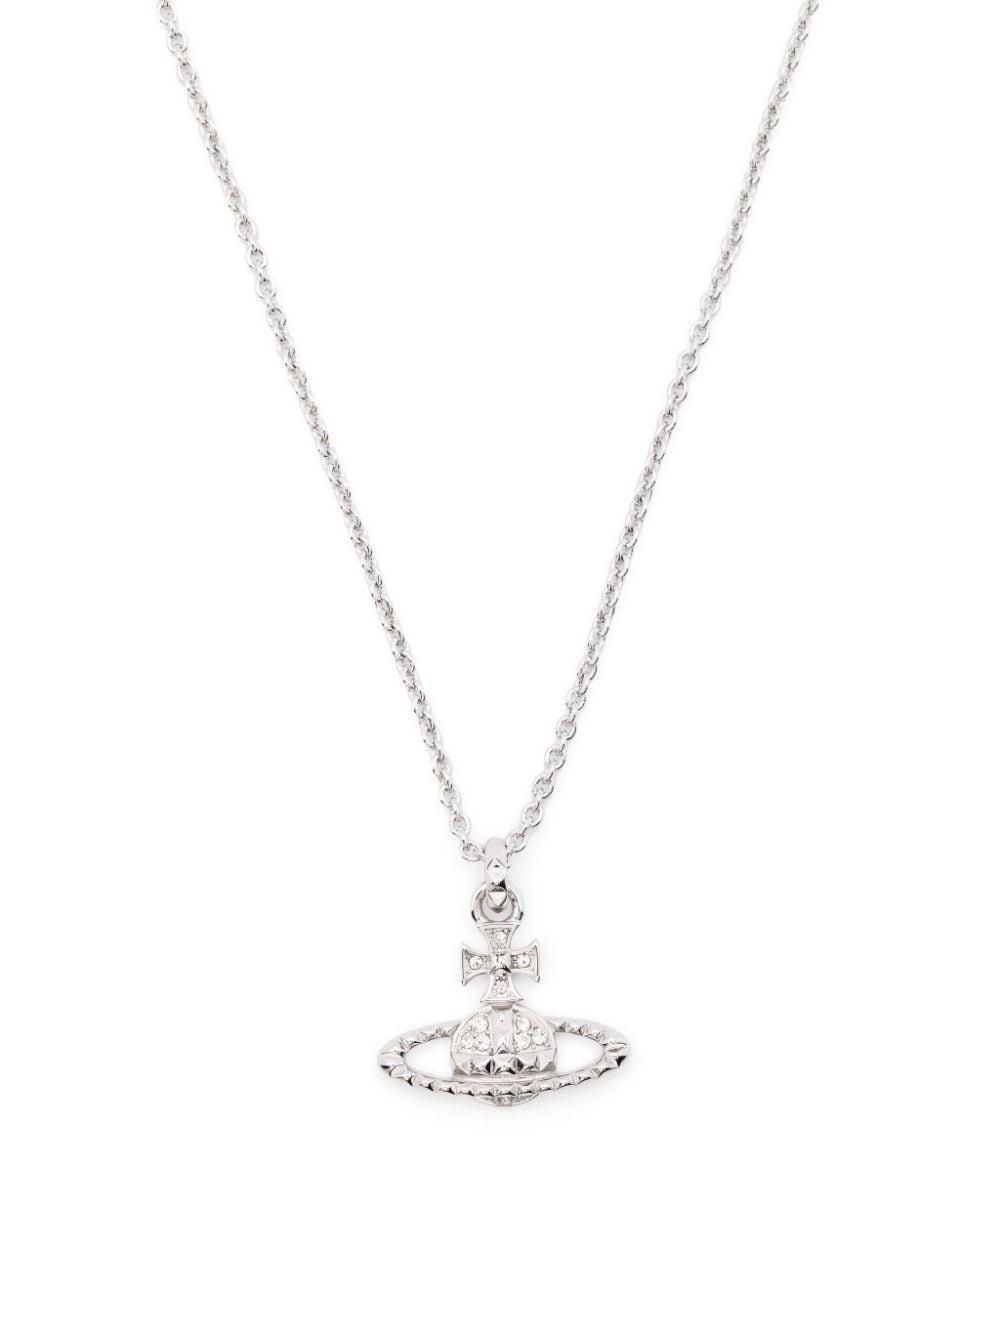 Vivienne Westwood Mayfair Bas Relief Chain Necklace in White | Lyst